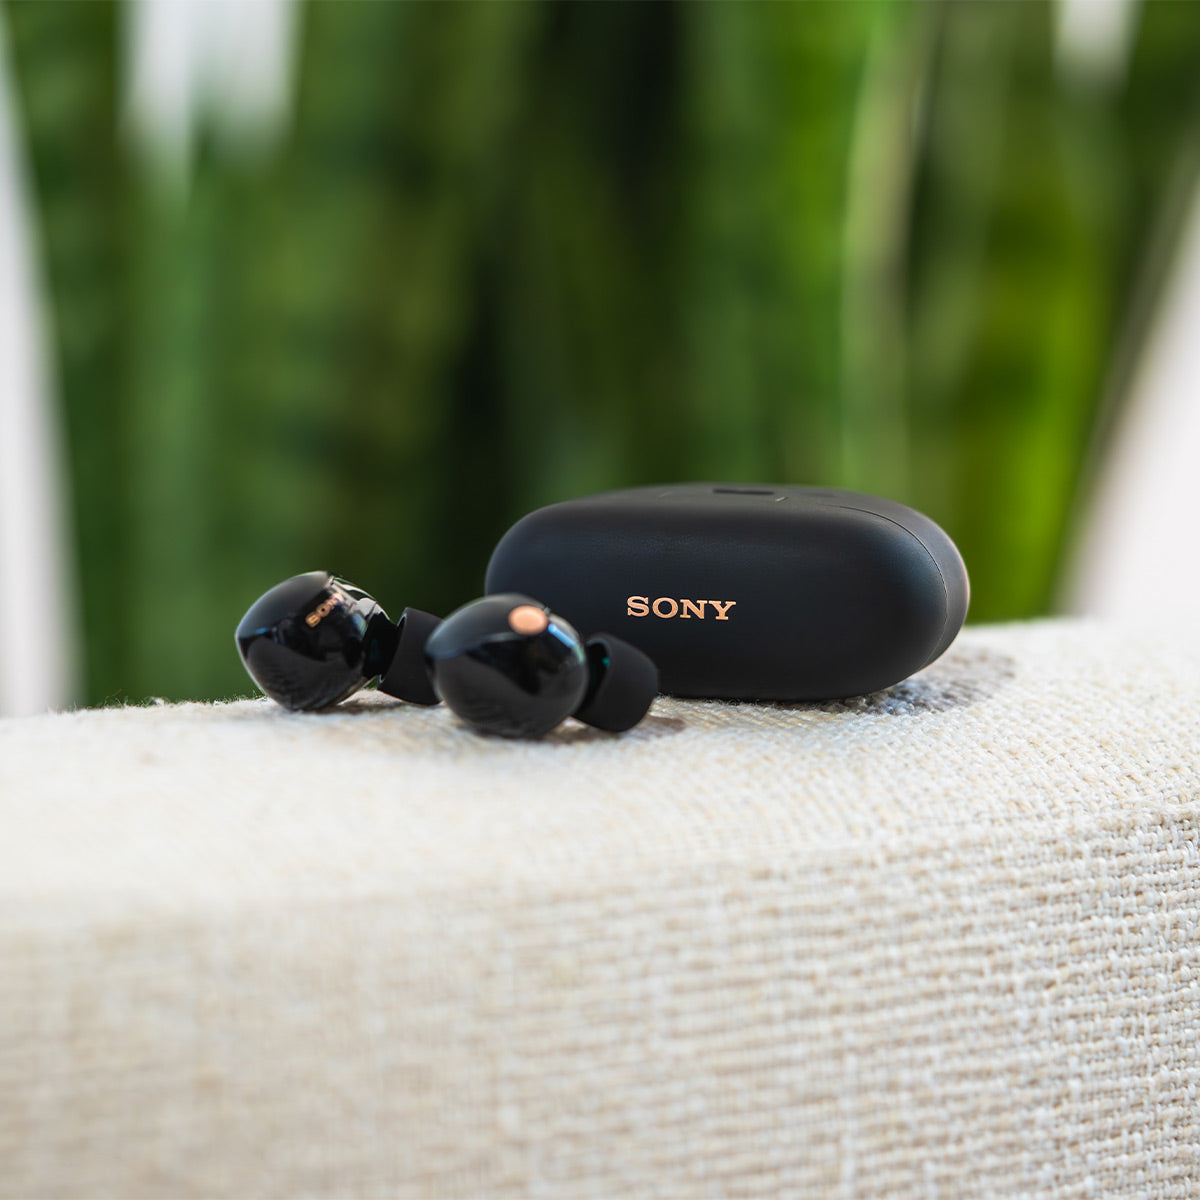 Sony WF-1000XM5 The Best Truly Wireless Bluetooth Noise Canceling Earbuds  Headphones with Alexa Built in, Black- New Model